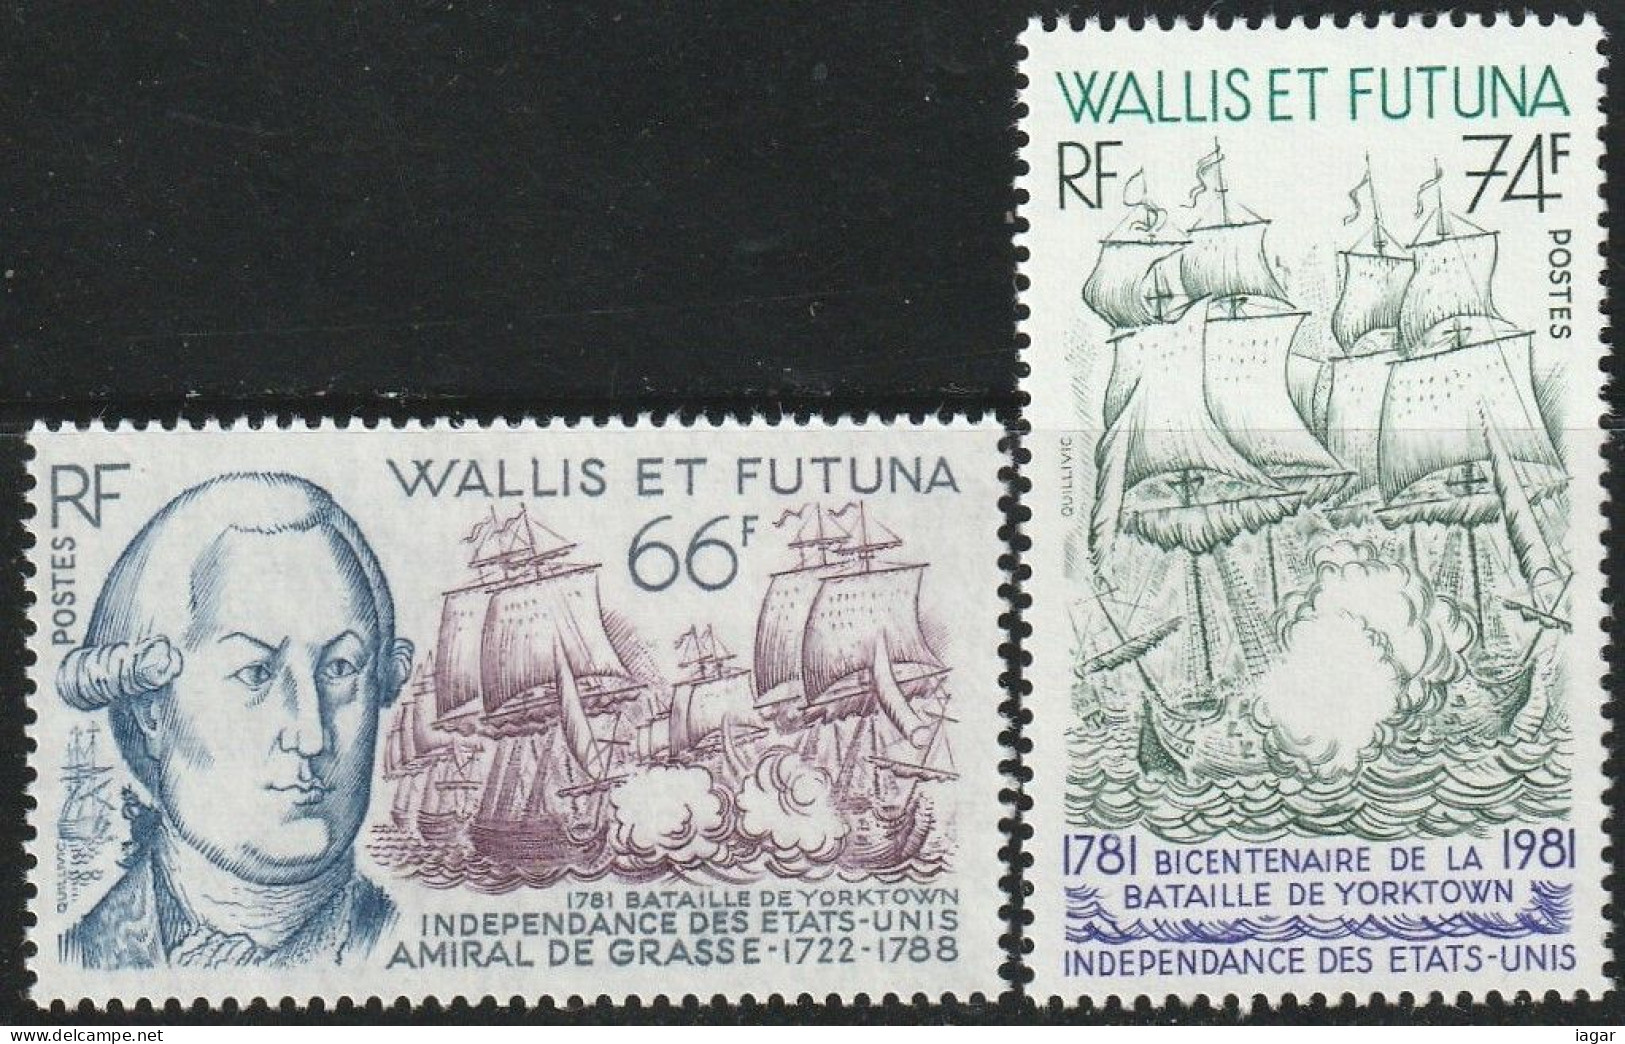 THEMATIC HISTORY:  INDEPENDENCE OF THE UNITED STATES, BATTLE OF YORKTOWN. ASPECTS OF NAVAL BATTLE  -  WALLIS AND FUTUNA - Onafhankelijkheid USA